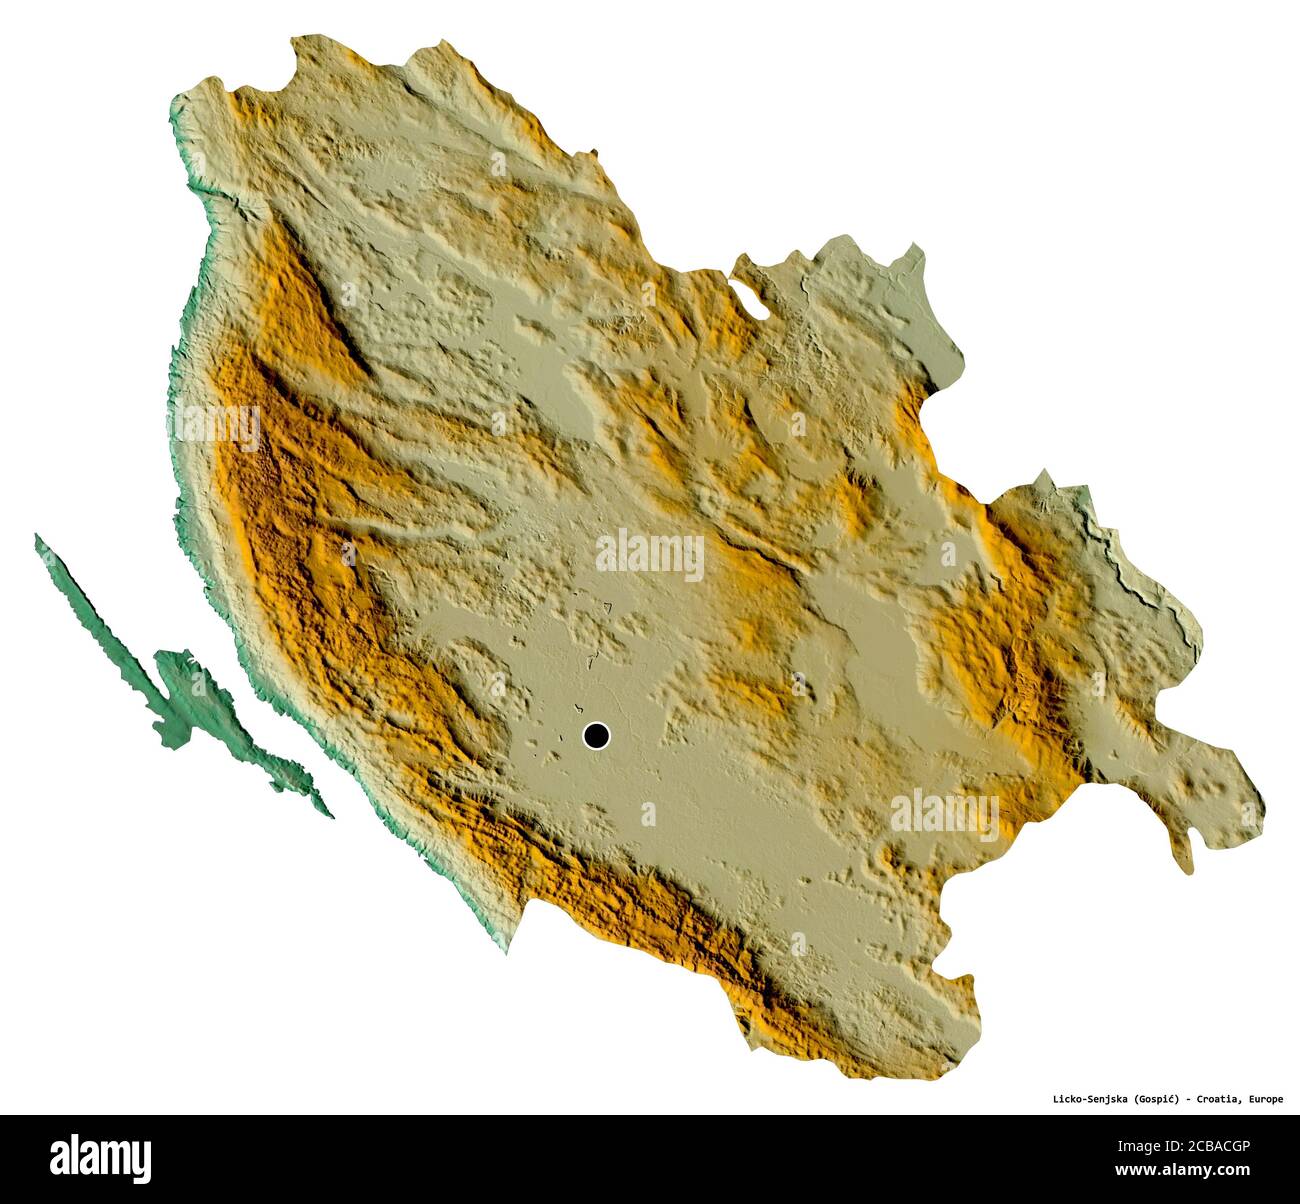 Shape of Licko-Senjska, county of Croatia, with its capital isolated on white background. Topographic relief map. 3D rendering Stock Photo